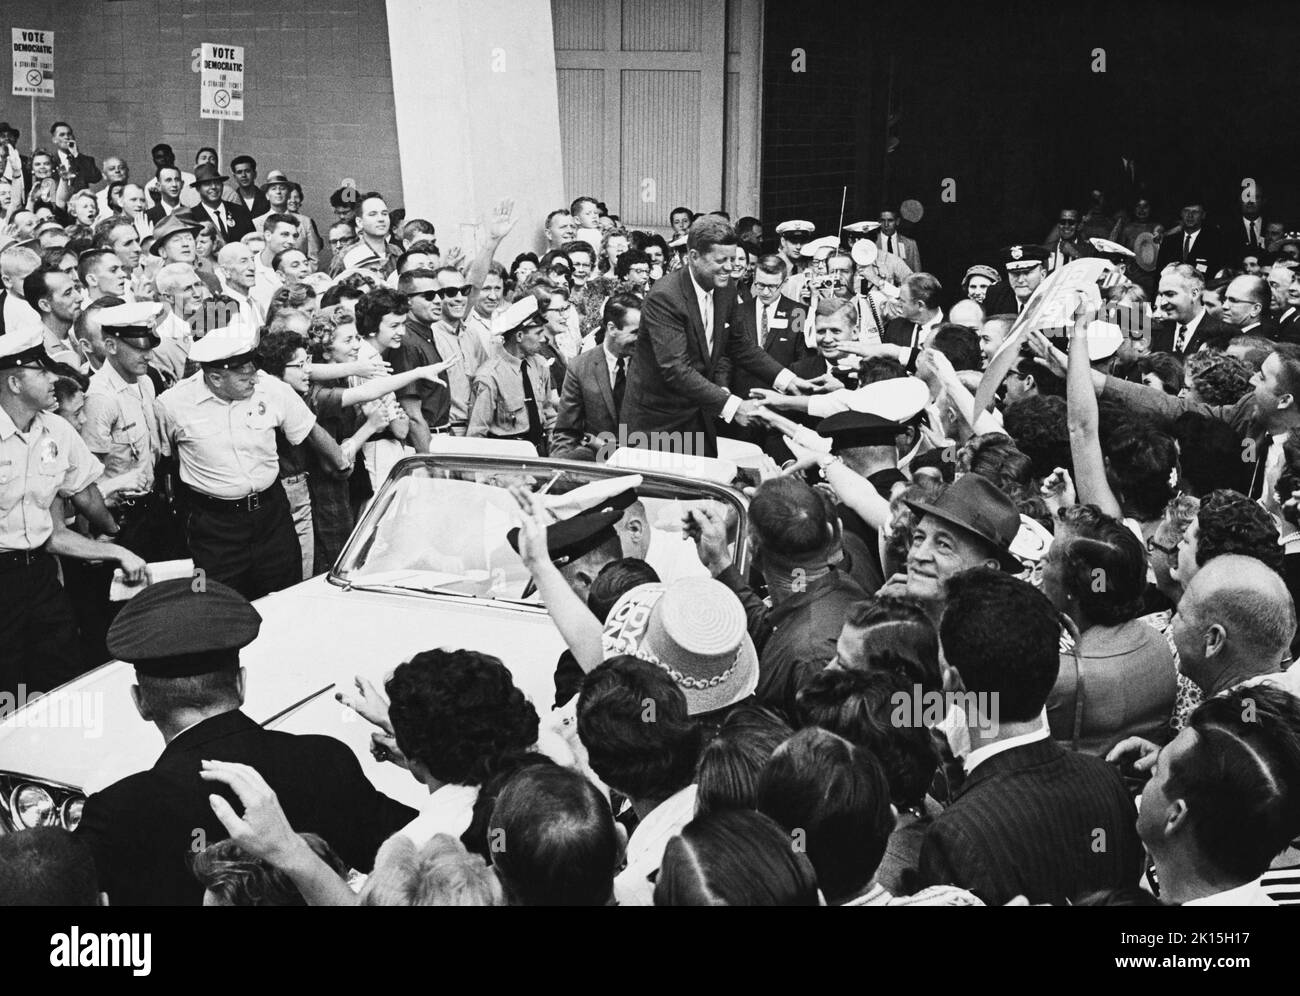 Presidential candidate John F. Kennedy (May 29, 1917 - November 22, 1963) is greeted by hundreds of people as he campaigns in October, 1960, in Charlotte, NC. JFK carried North Carolina in the election. Stock Photo